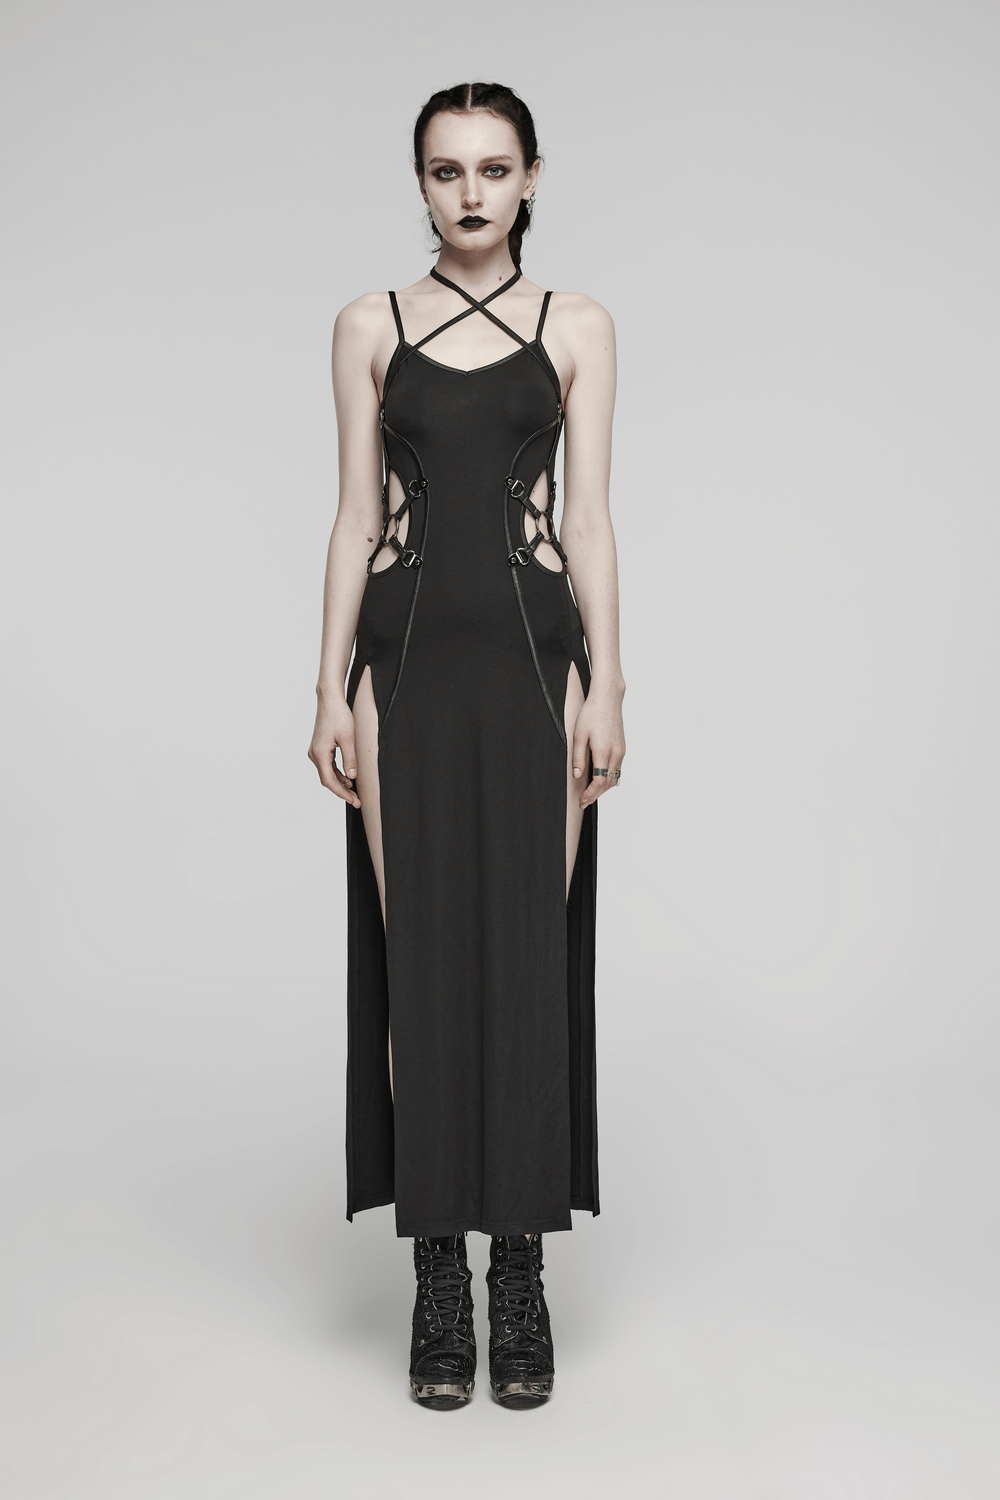 Edgy Long Two-Way Straps Dress with Slits and Lace Up